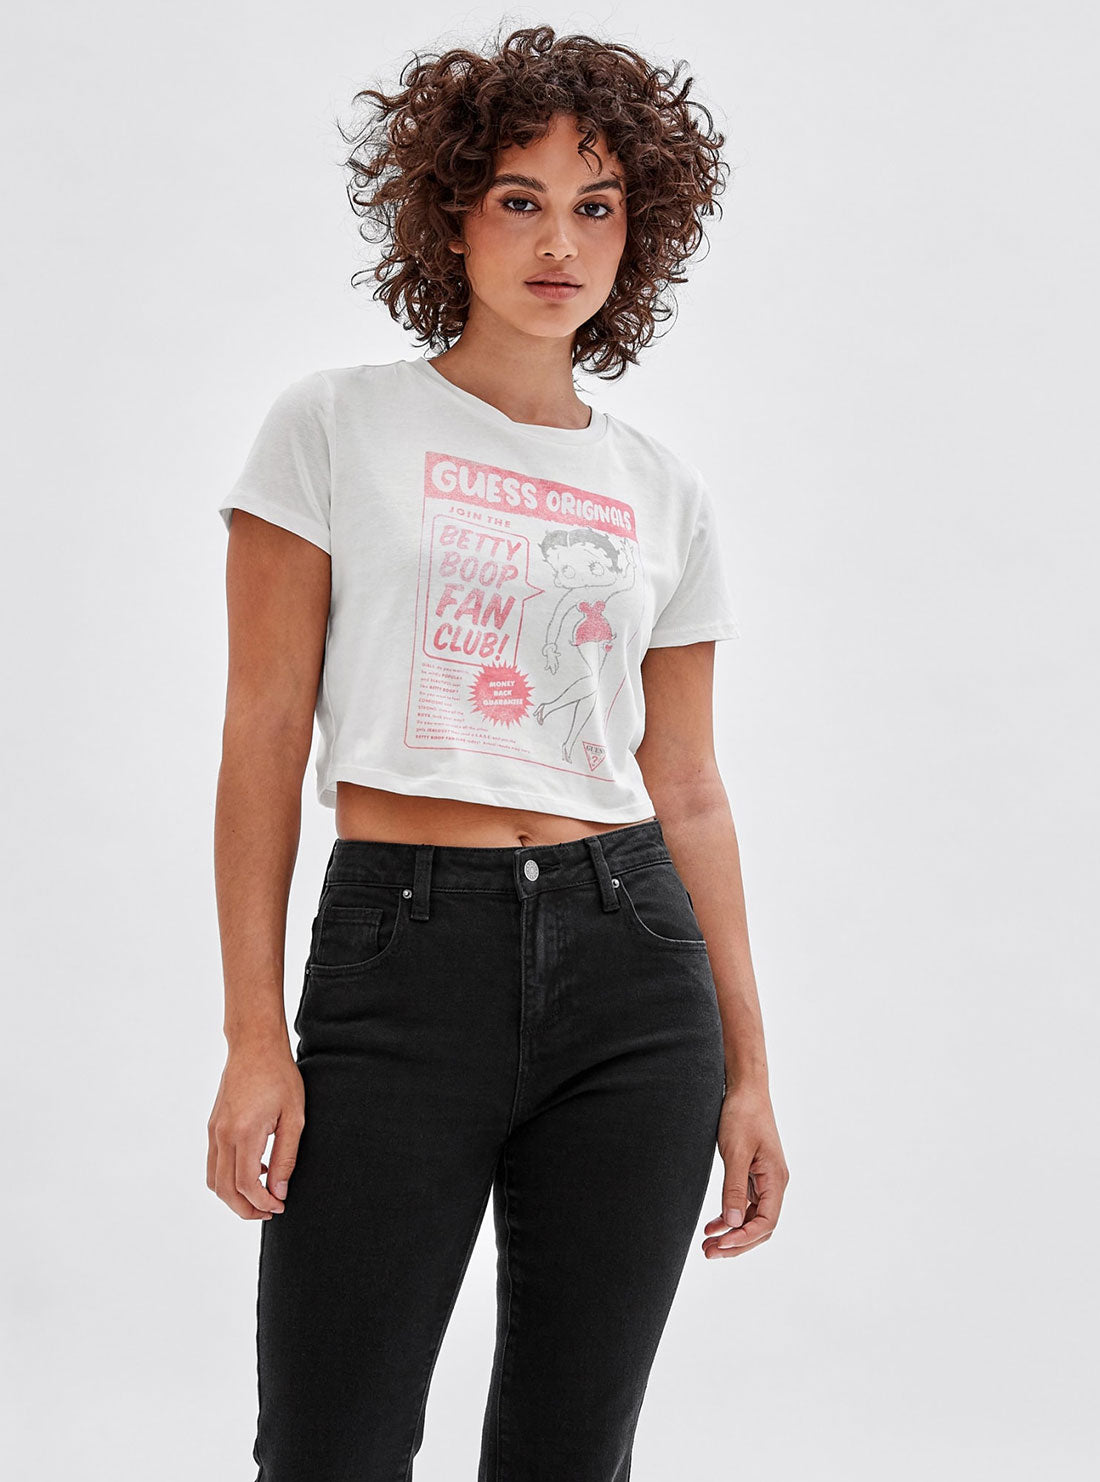 GUESS Women's Guess Originals x Betty Boop White Cropped Baby T-Shirt W2BP08K9RM3 Front View